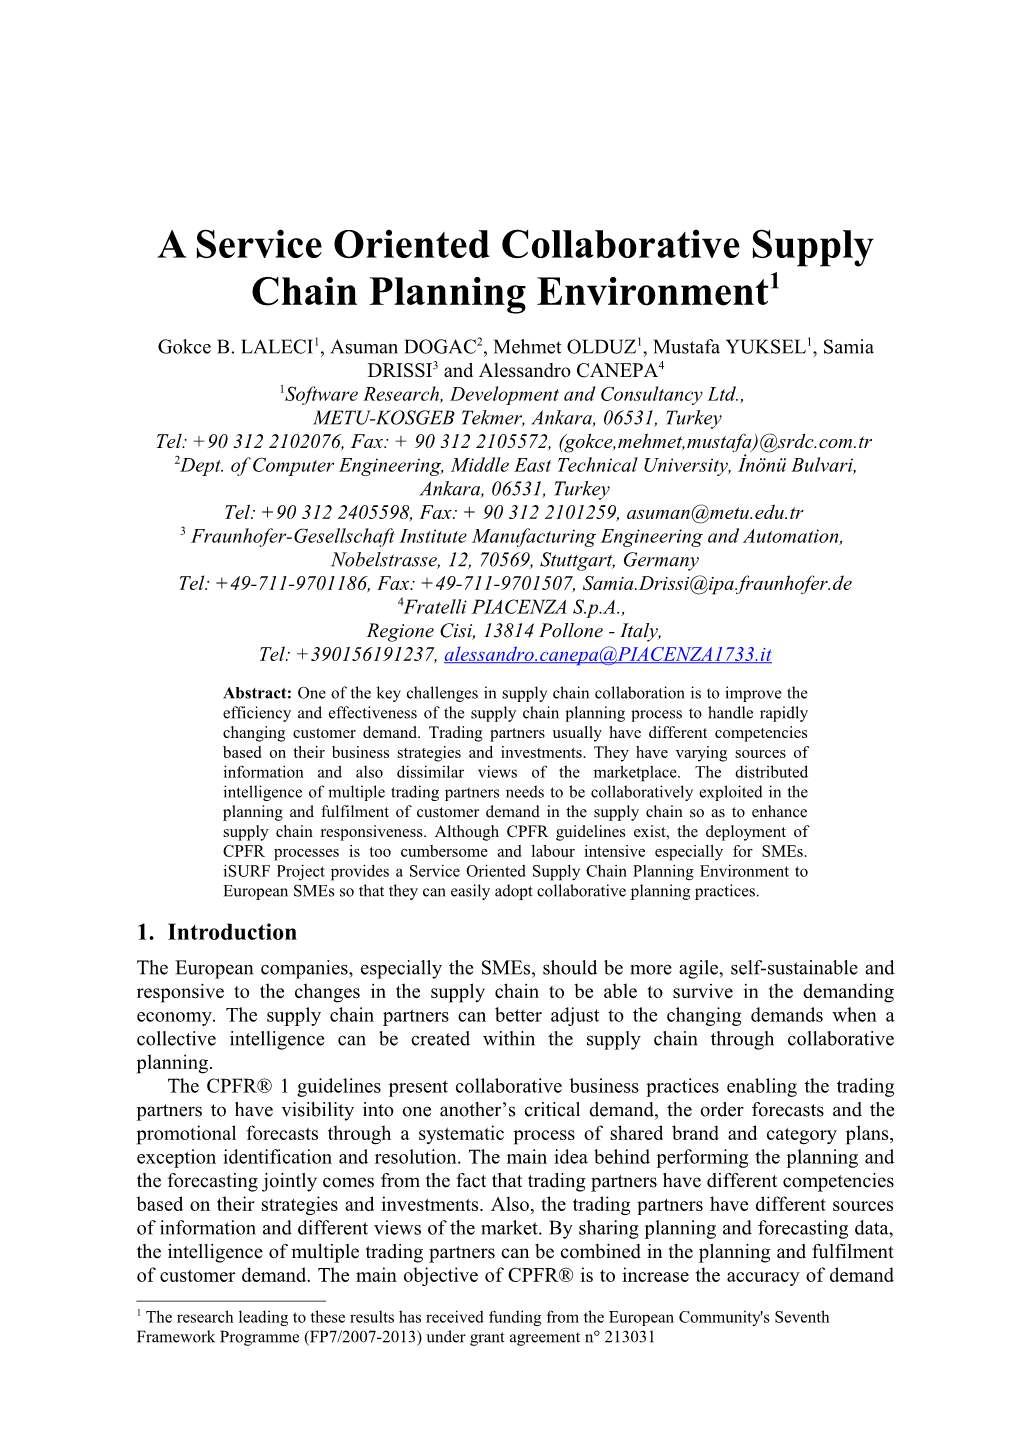 A Service Oriented Collaborative Supply Chain Planning Environment 1